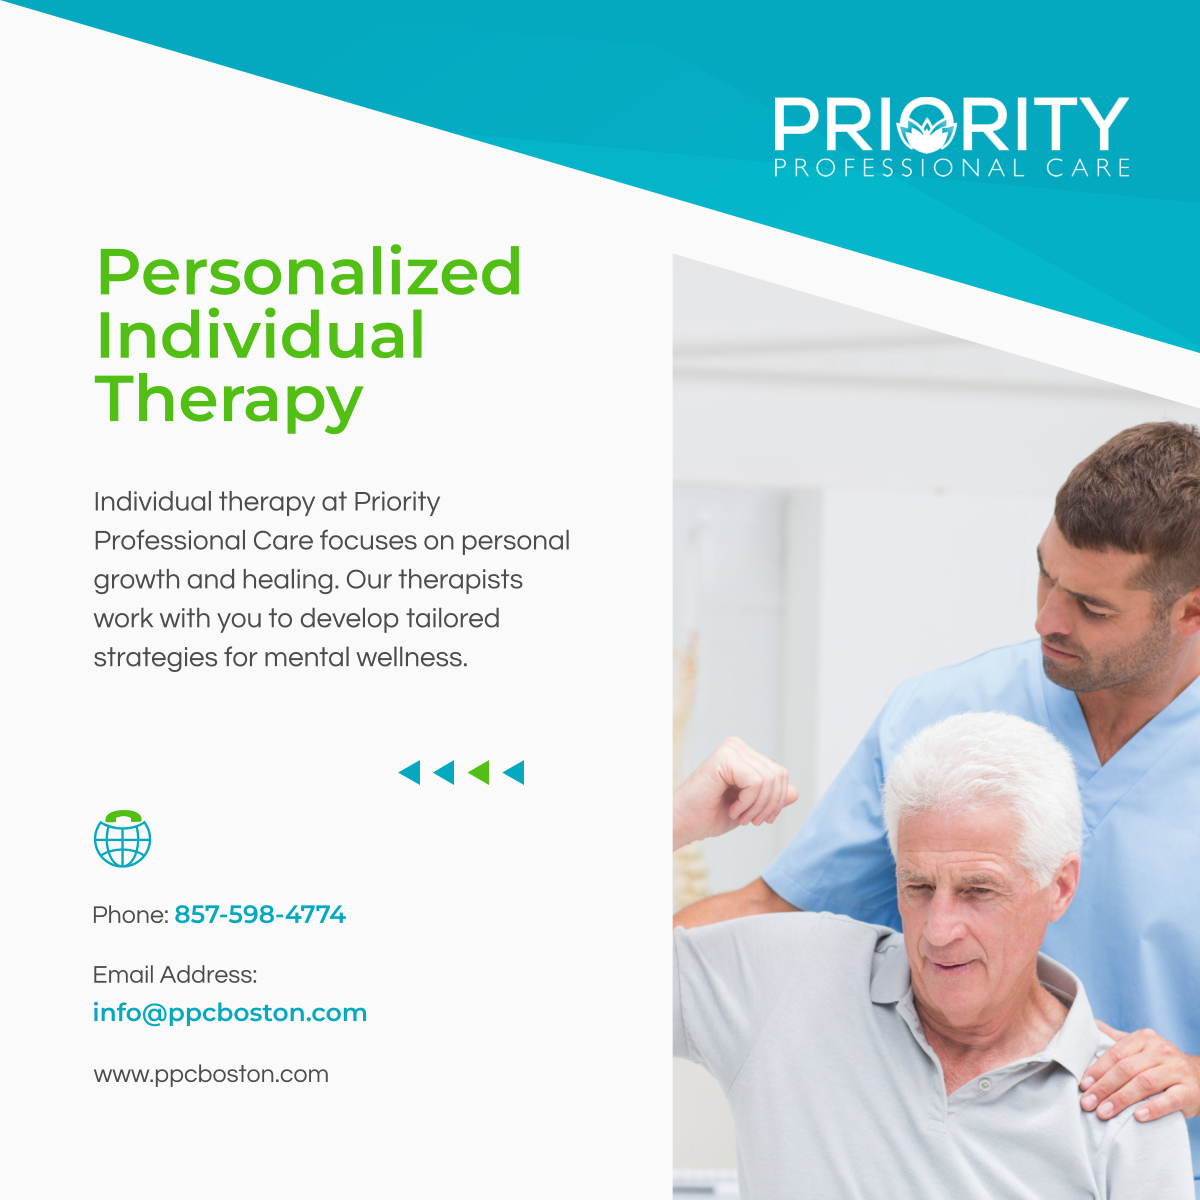 Embark on a journey of self-discovery and healing with our individual therapy. Our dedicated therapists are here to guide you through personalized mental wellness plans.

#CaregiverSupport #MentalHealthMatters #TrainingTuesday #FosterCareSuccessStories #IndividualTherapy